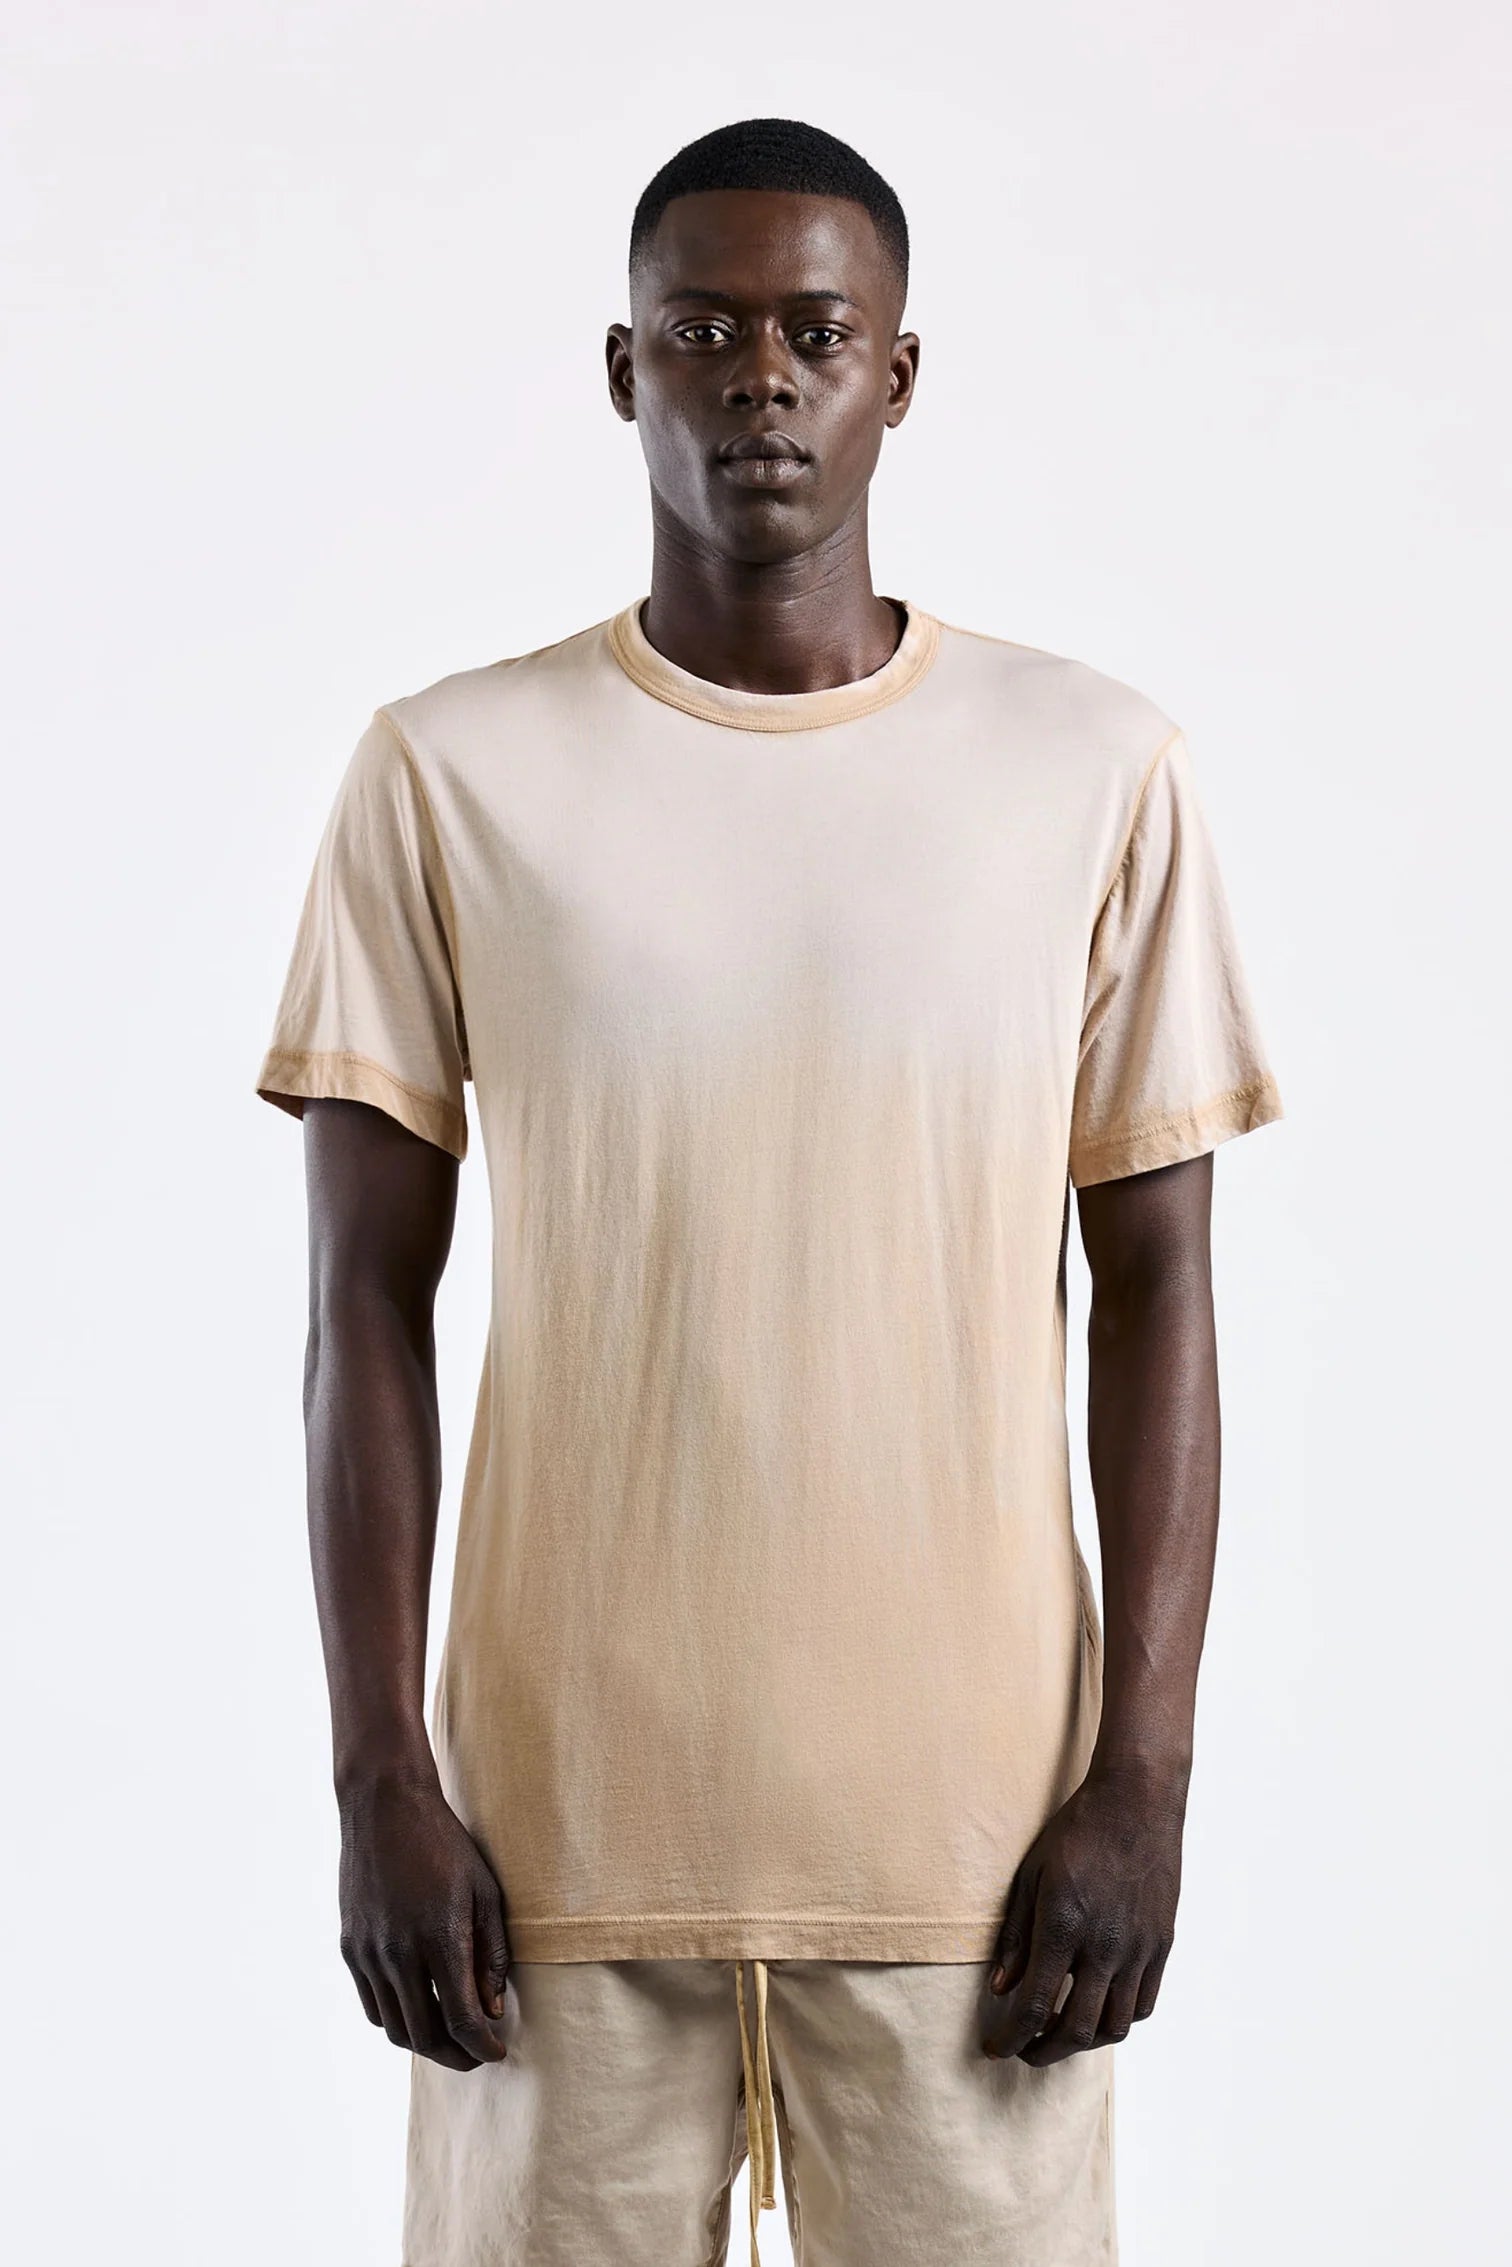 The prince tee - beige cast